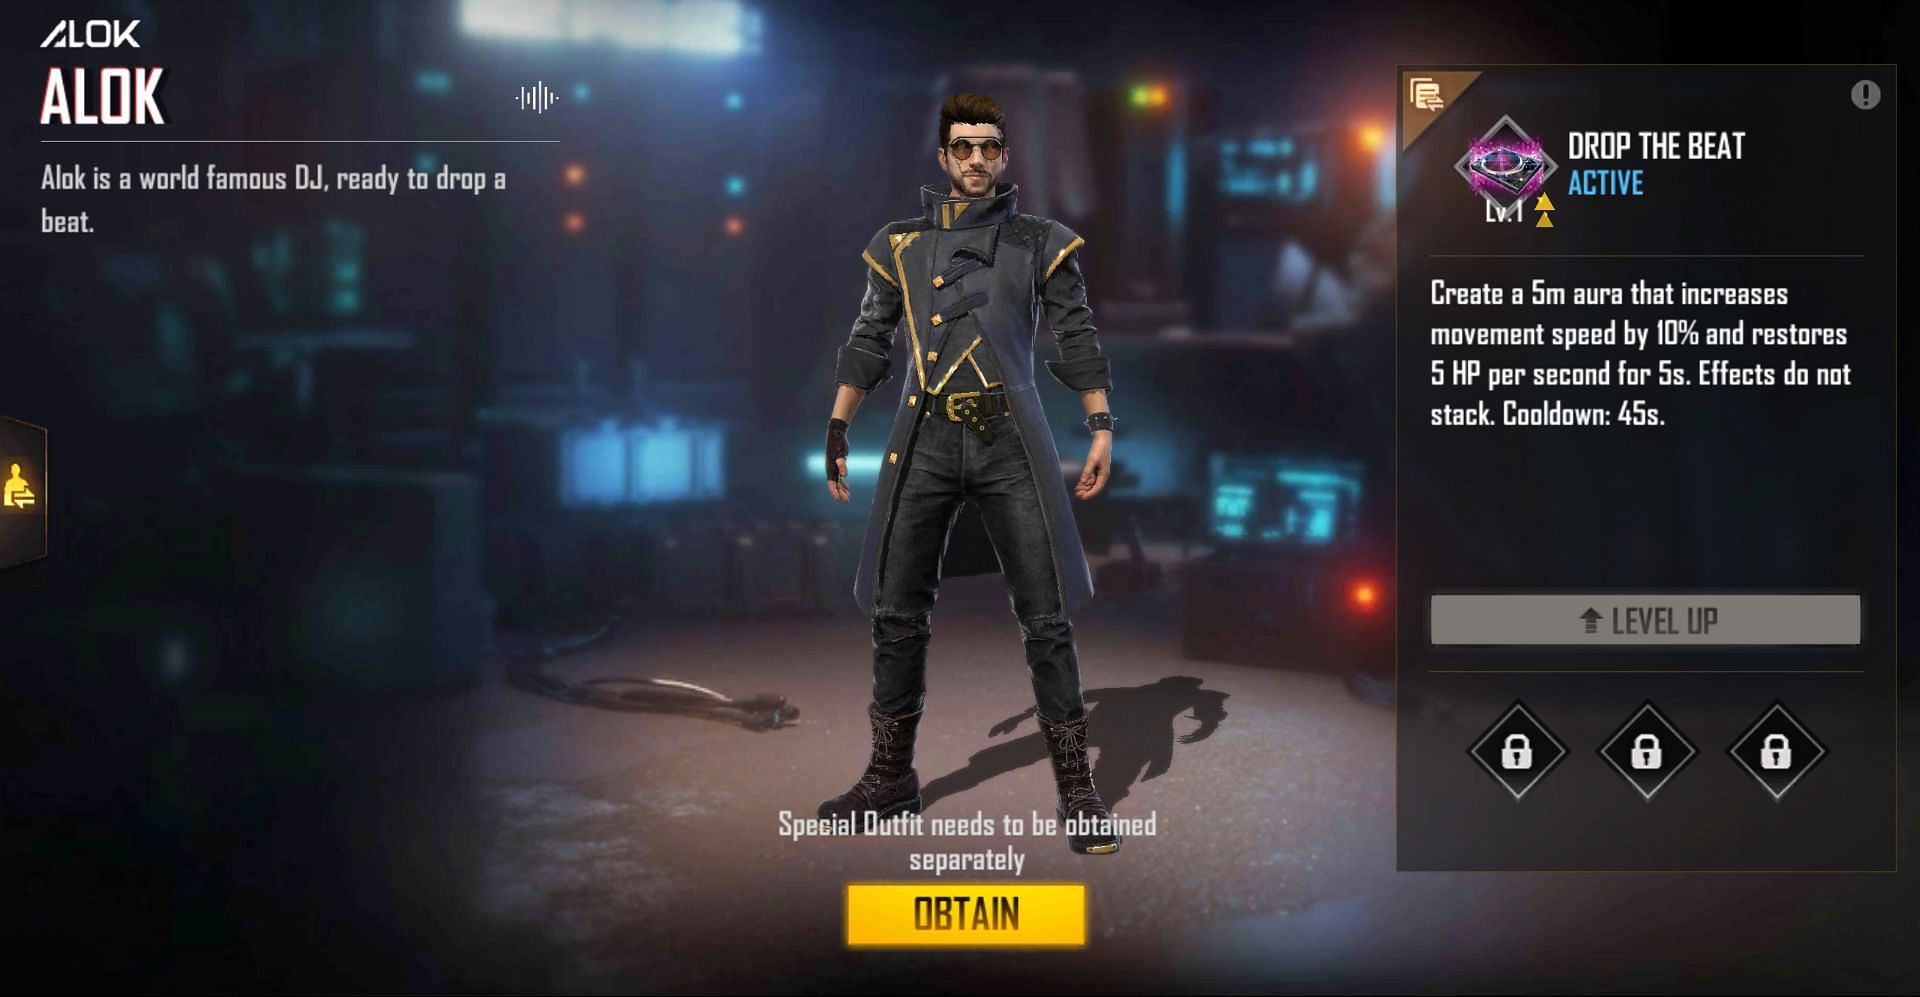 Alok can be a good choice for players (Image via Free Fire)